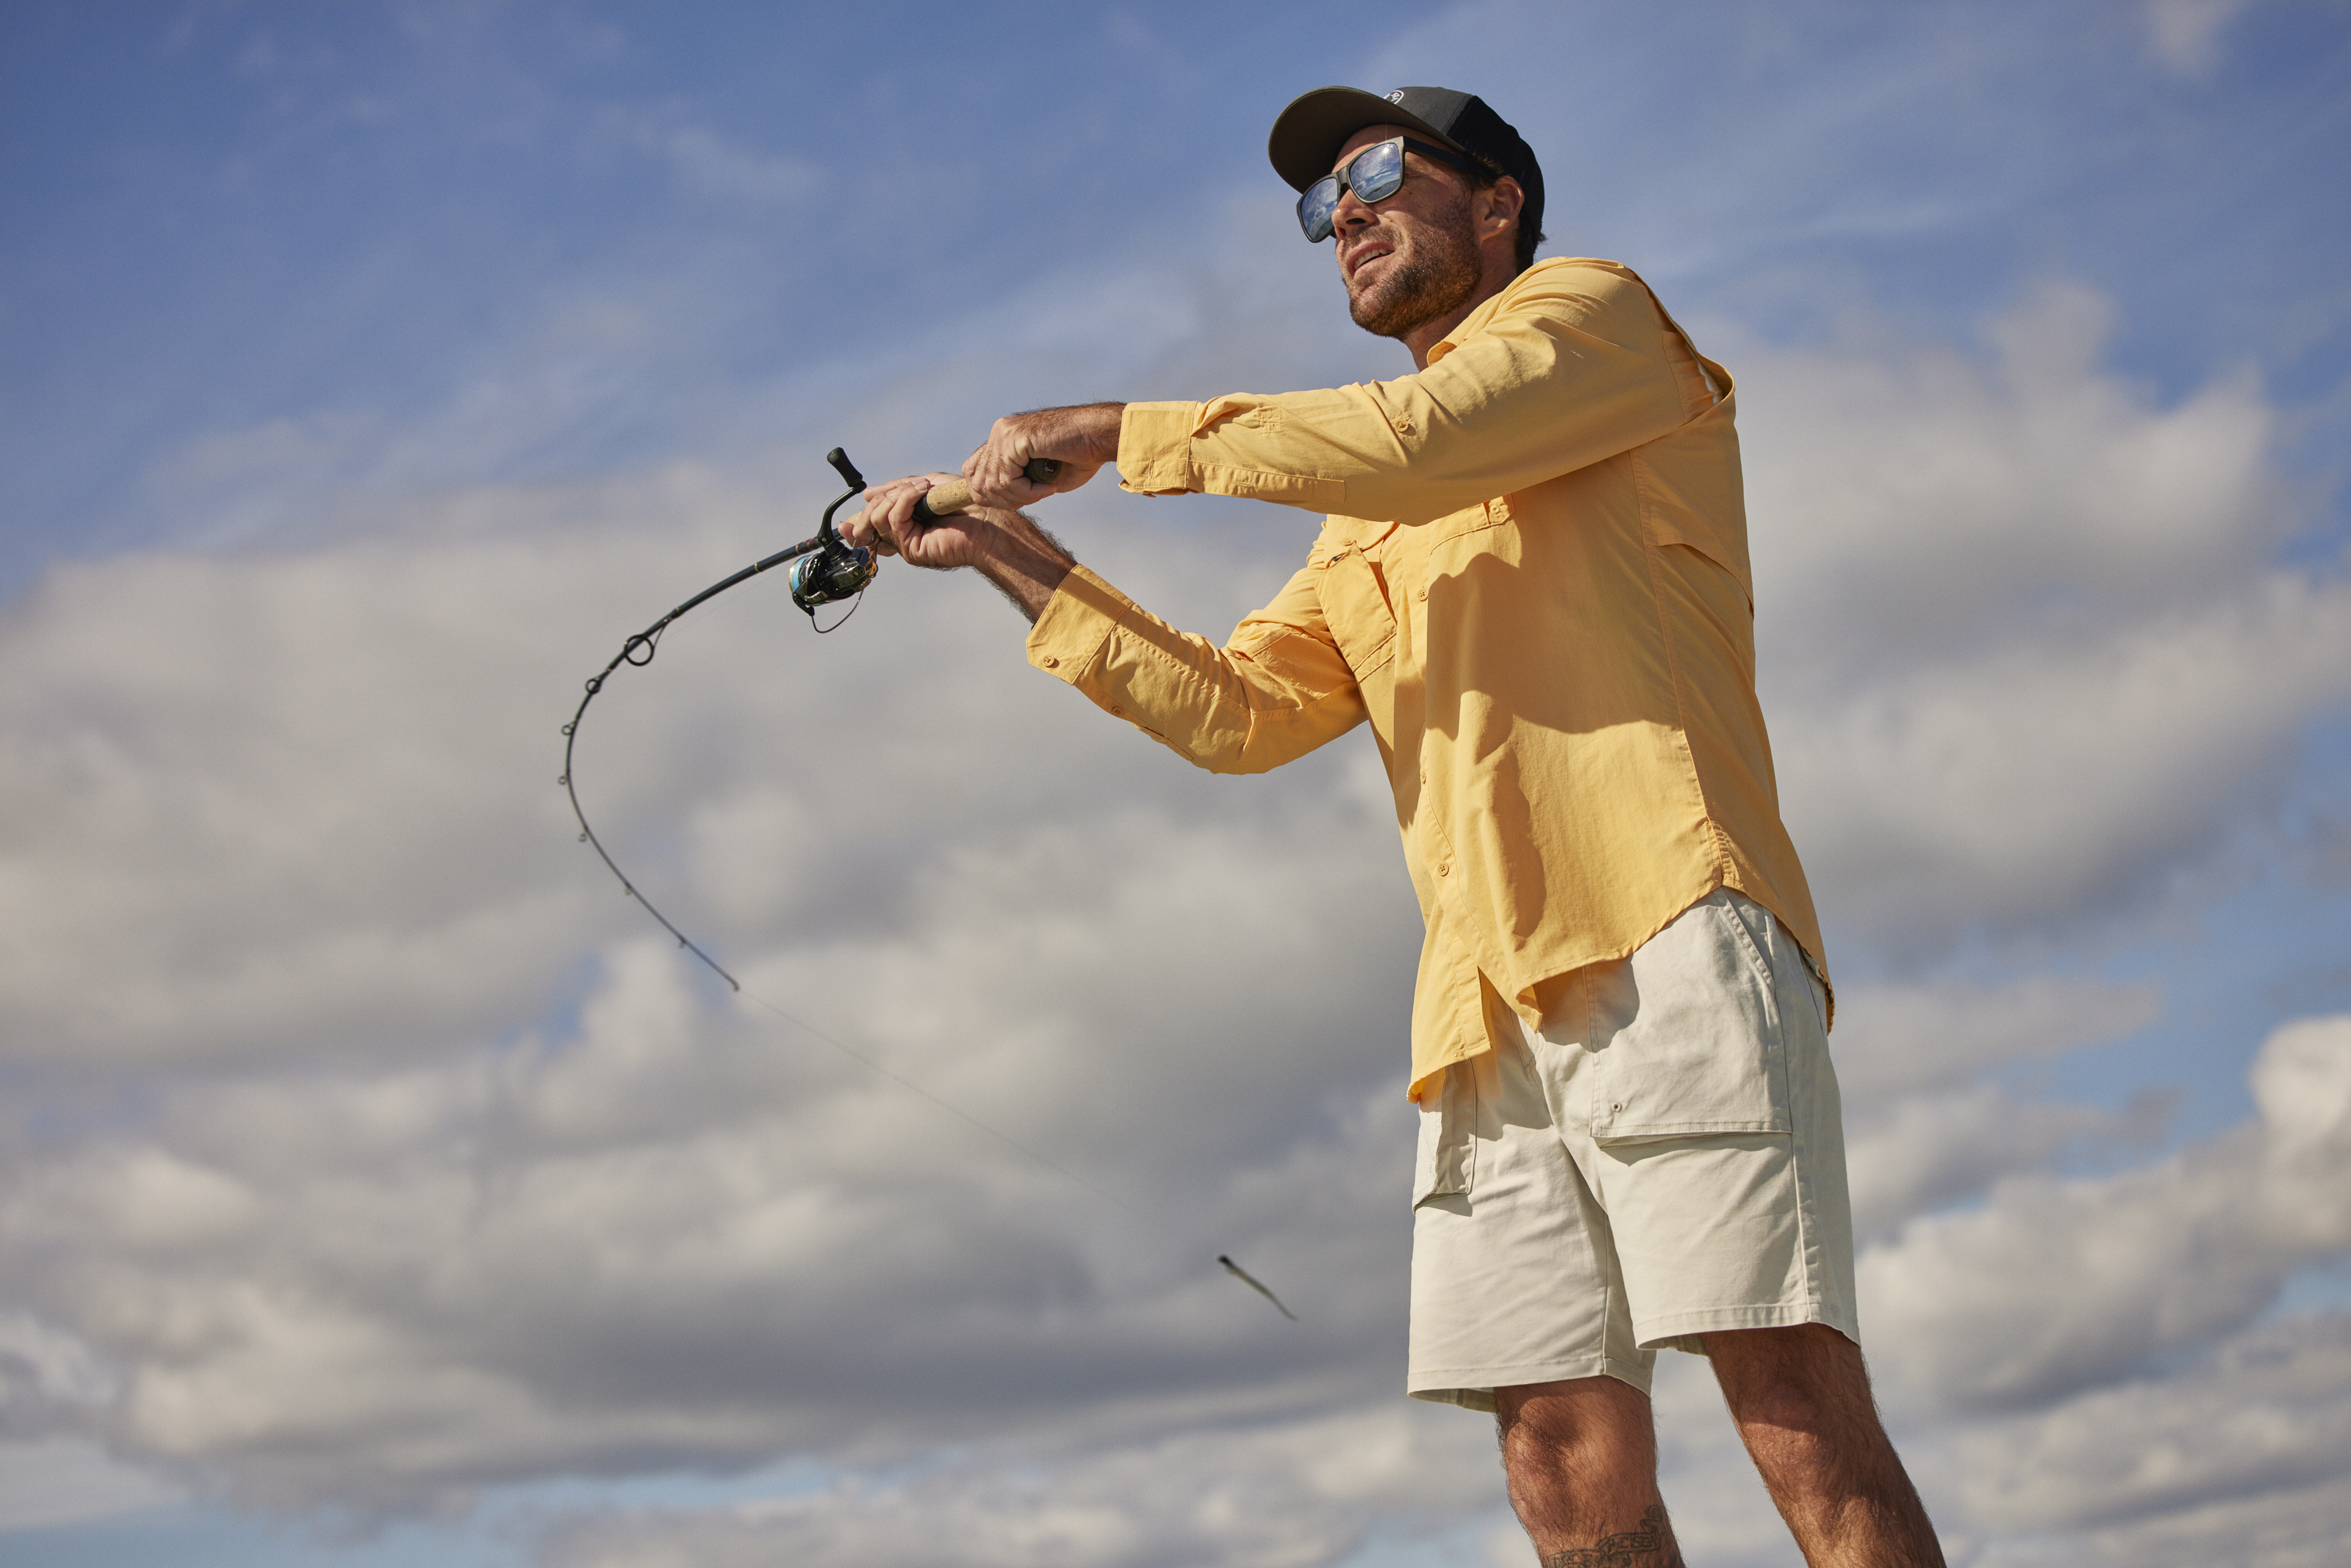 Wrangler Aims to Reel in Anglers With Its New Fishing Apparel